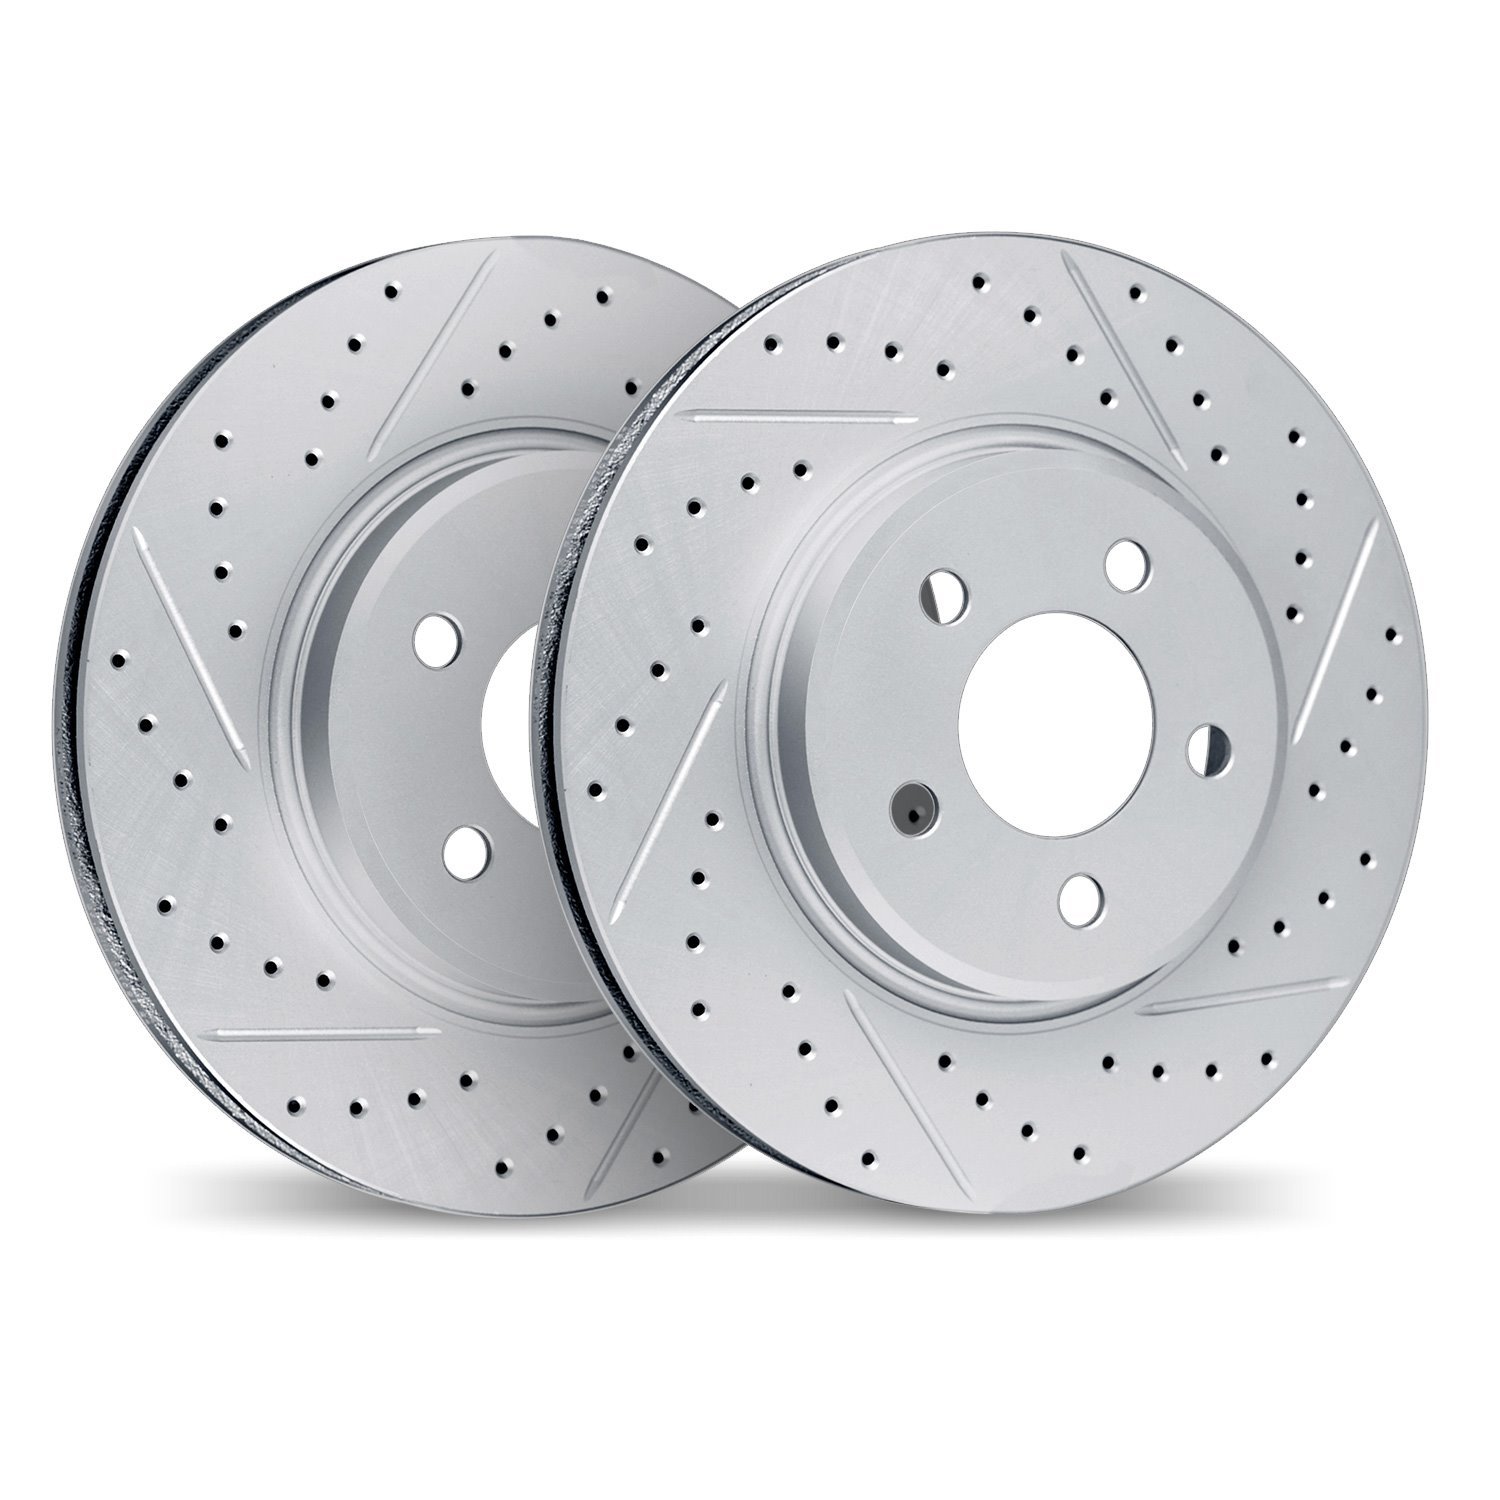 2002-76034 Geoperformance Drilled/Slotted Brake Rotors, 1993-1998 Lexus/Toyota/Scion, Position: Front